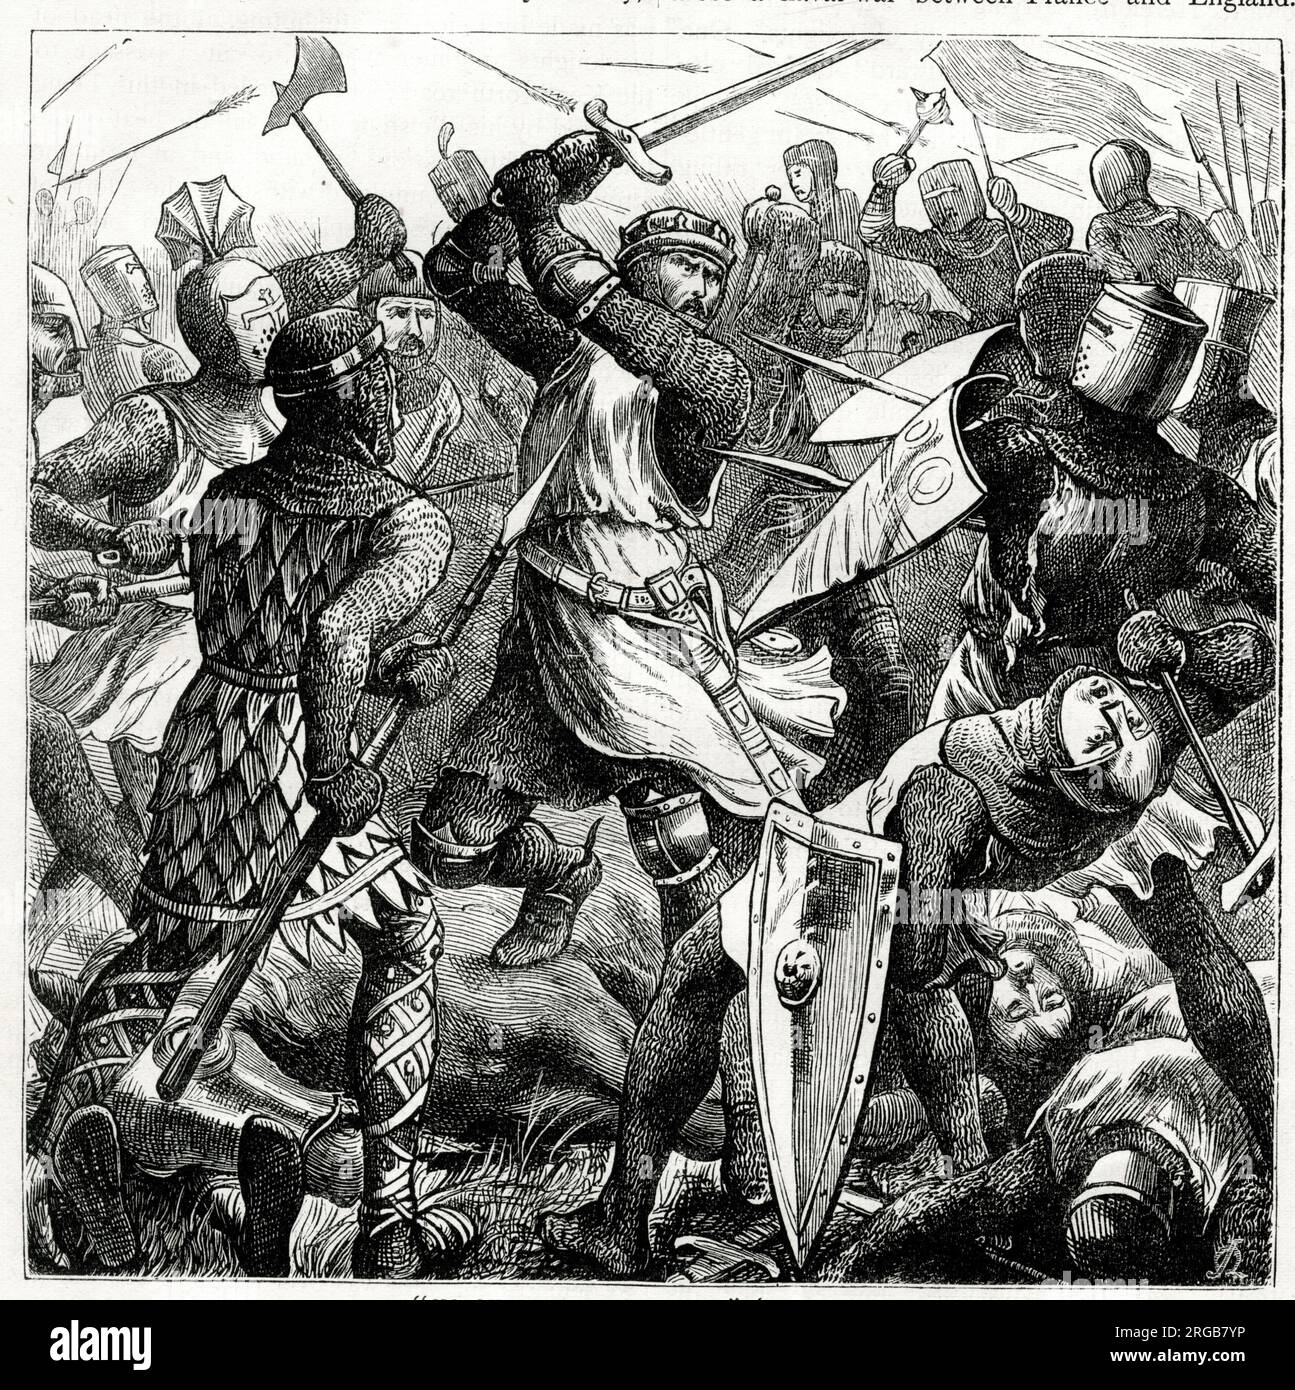 No Quarter to Traitors - Prince Edward (later King Edward I) fighting against Simon de Montfort, Earl of Leicester, at the Battle of Evesham, 4 August 1265, part of the Second Barons' War (1264-1267). Stock Photo